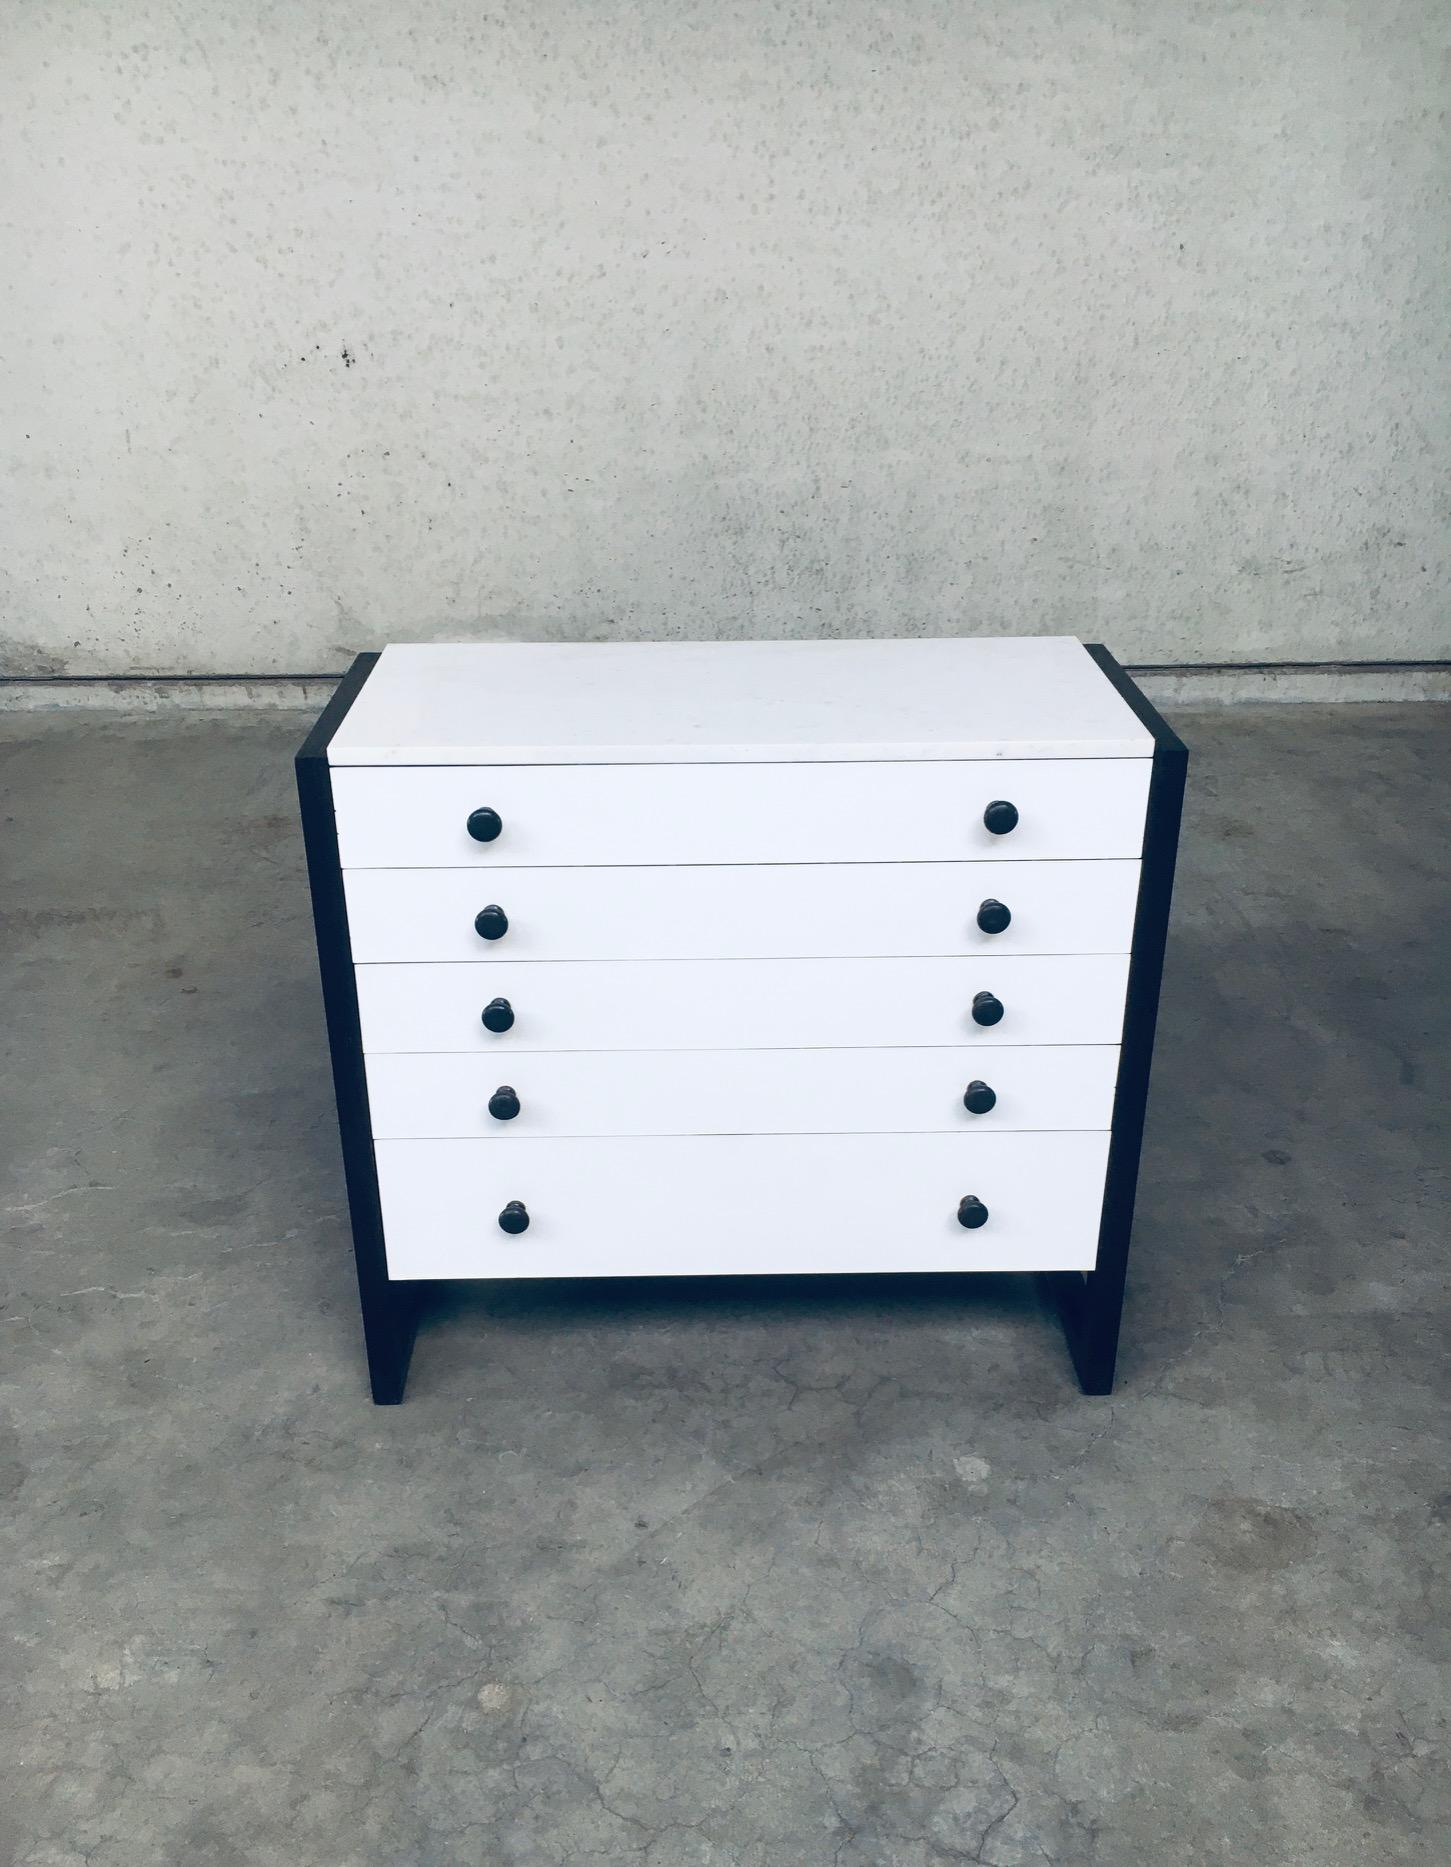 Mid-20th Century Midcentury Modern Design Chest of Drawers, Belgium 1960's For Sale